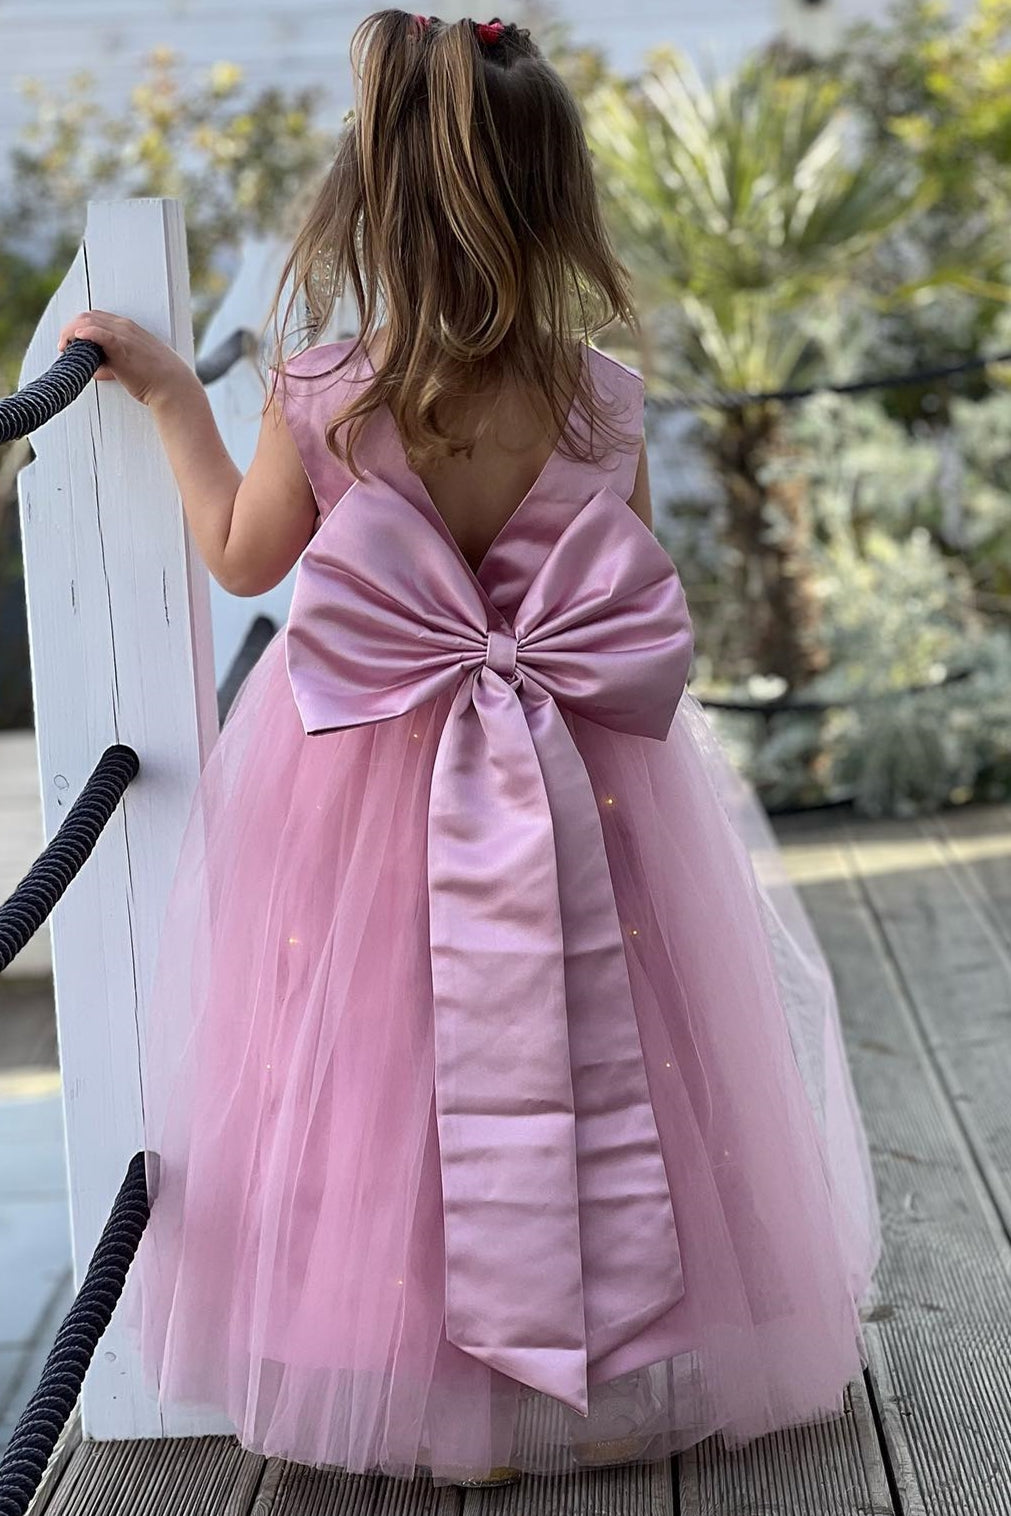 Adorable Dusky Pink Round Neck Bow-Back A-Line Girl Party Dress